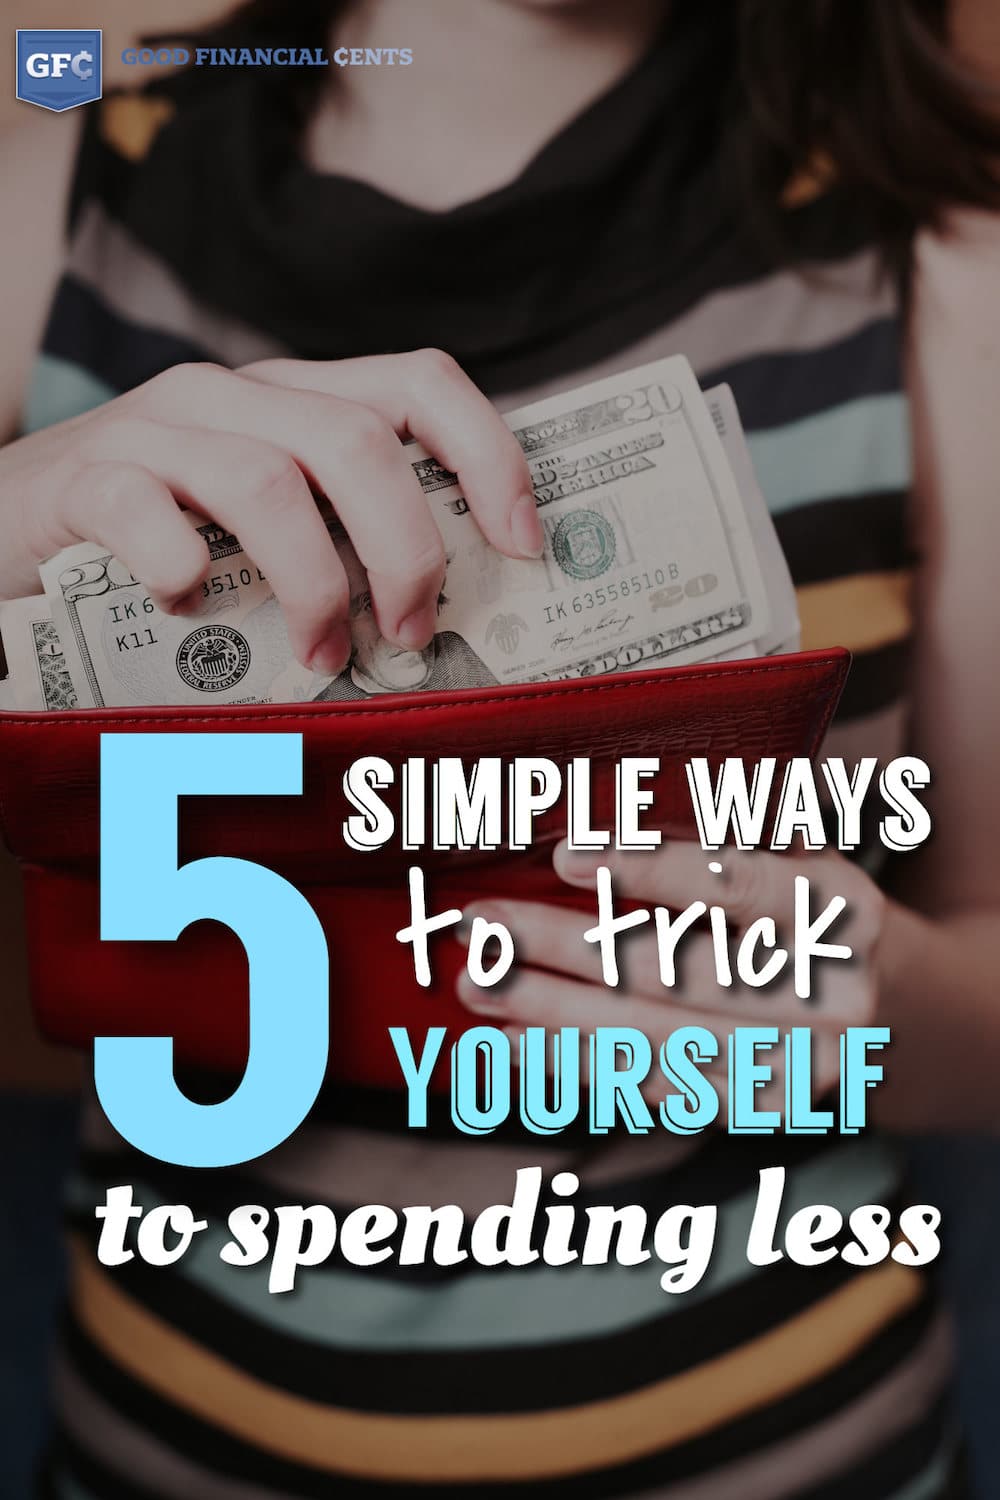 5 Simple Ways To Spend Less Money Tips Tricks Advice Habits - how to spend less money easy steps